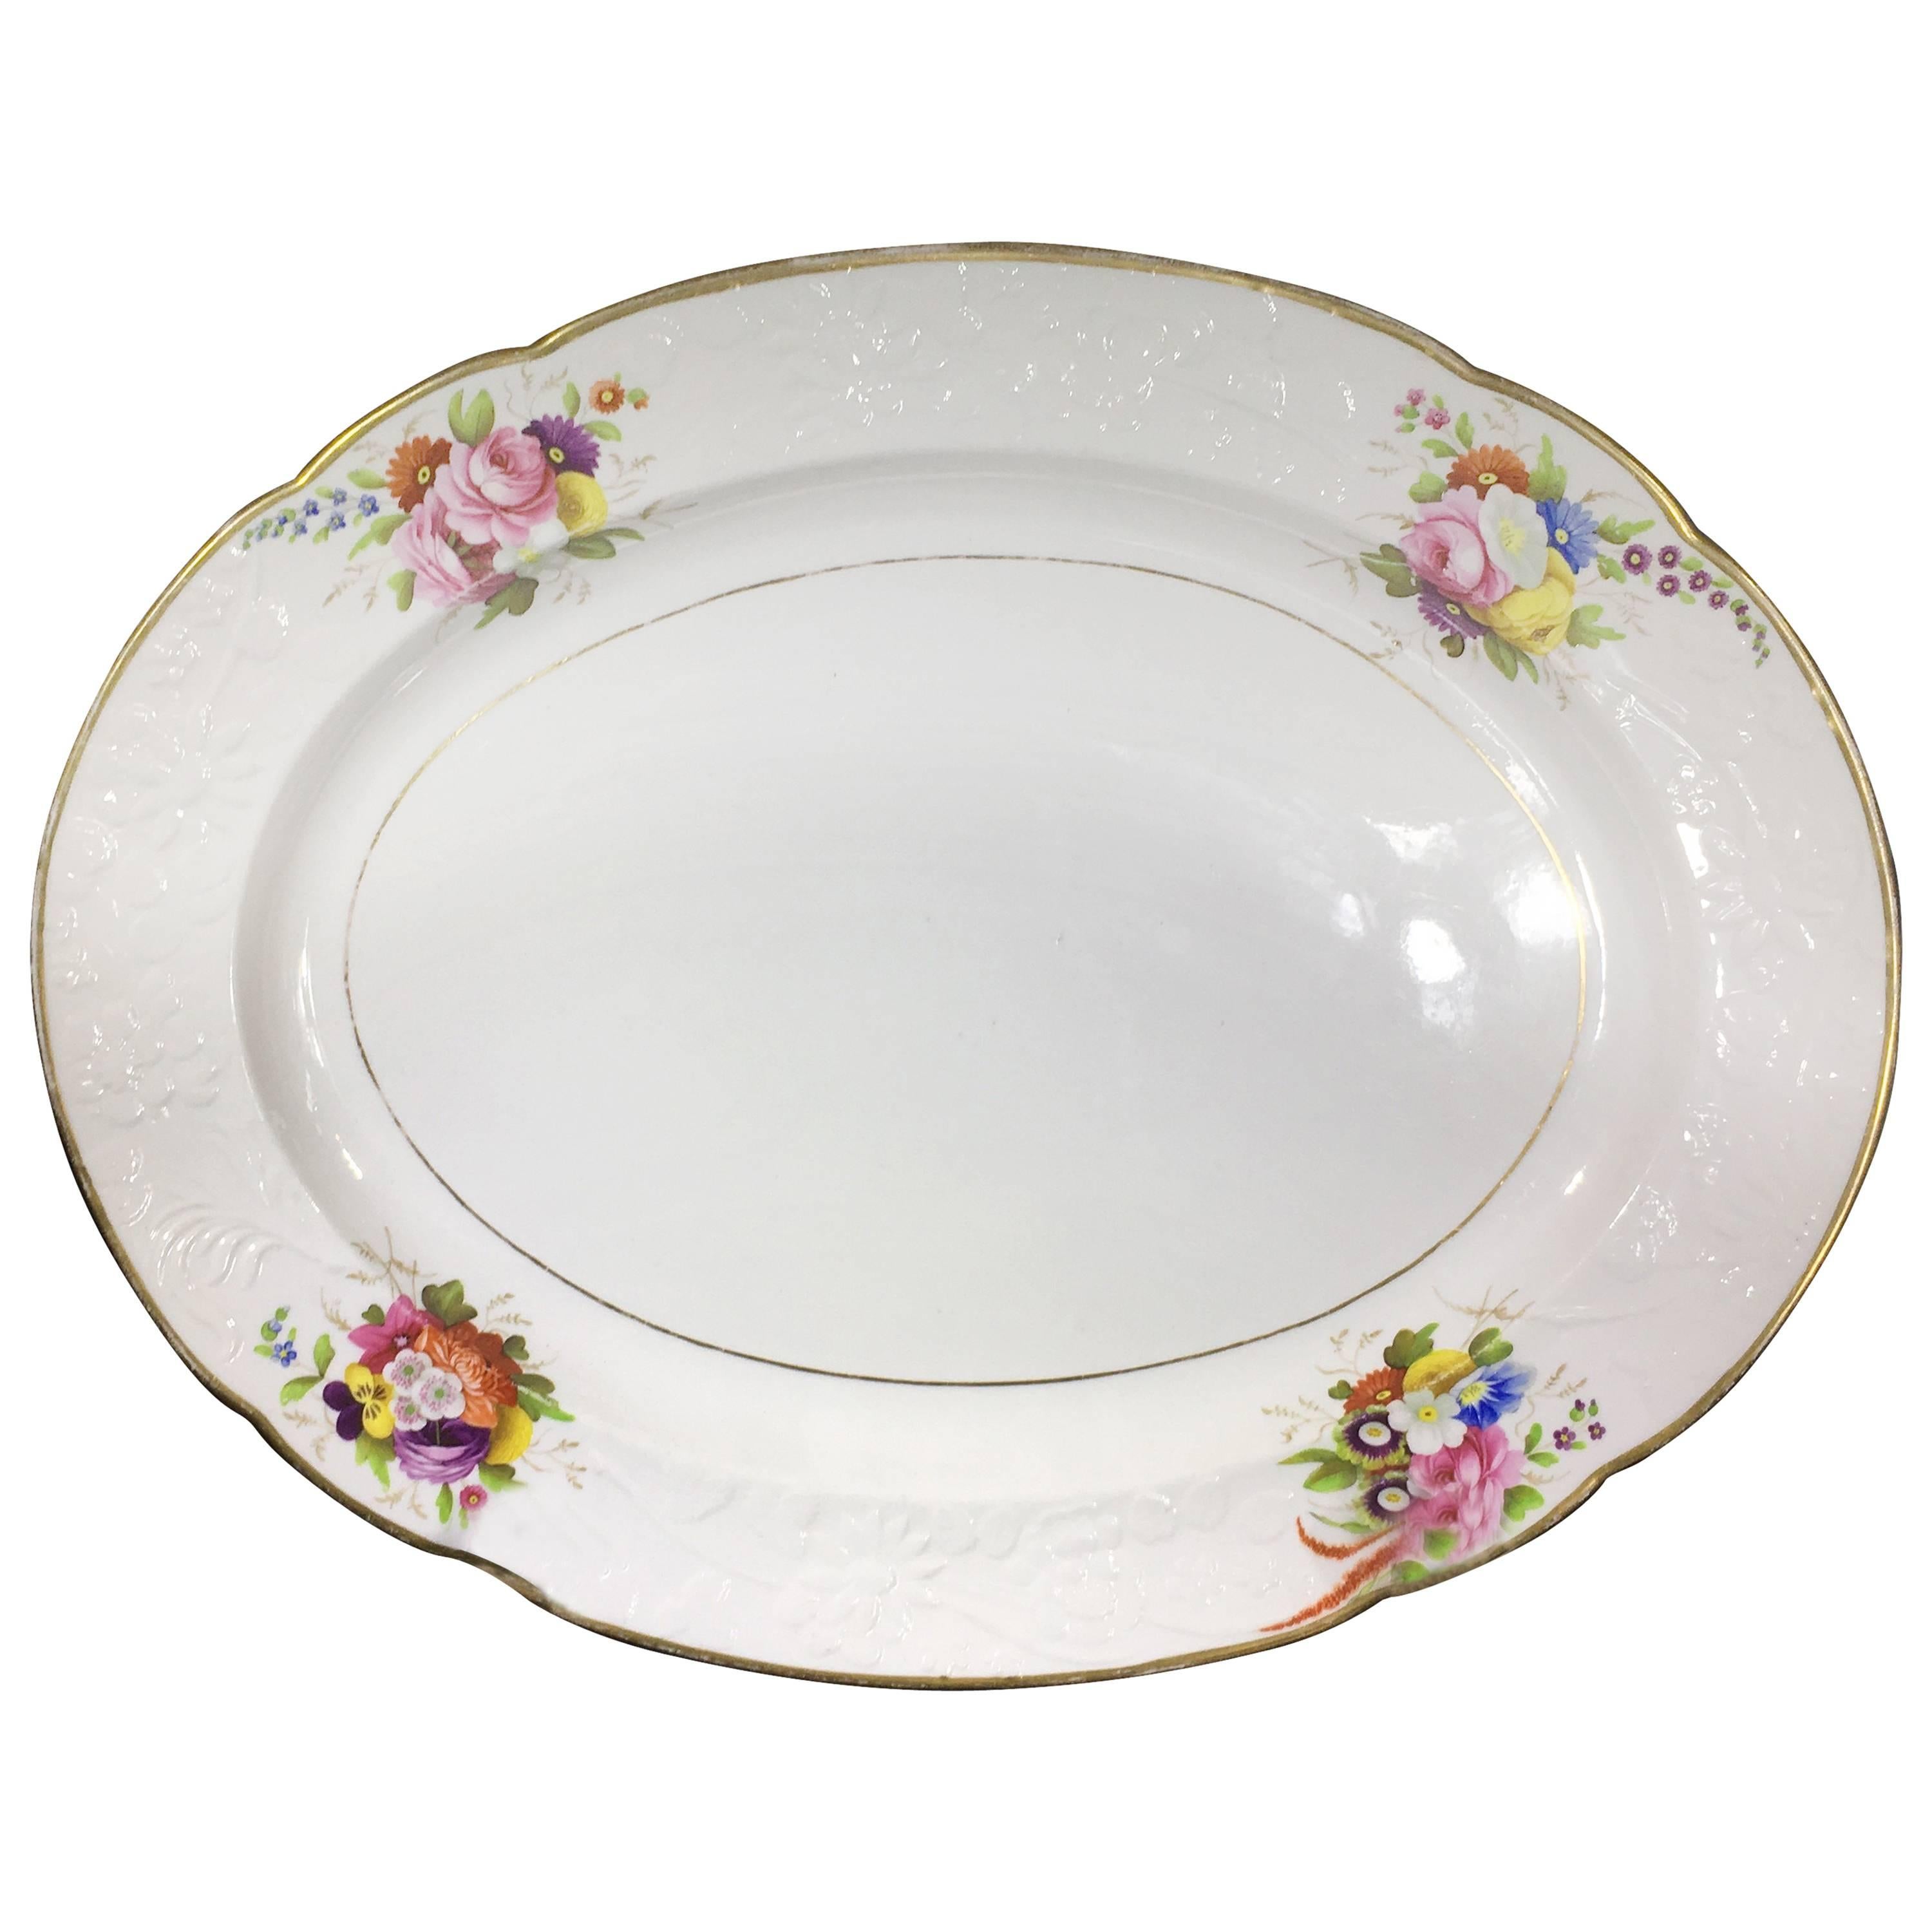 Large Spode Oval Platter, Moulded and Painted Flowers, Pat. 1943, circa 1815 For Sale